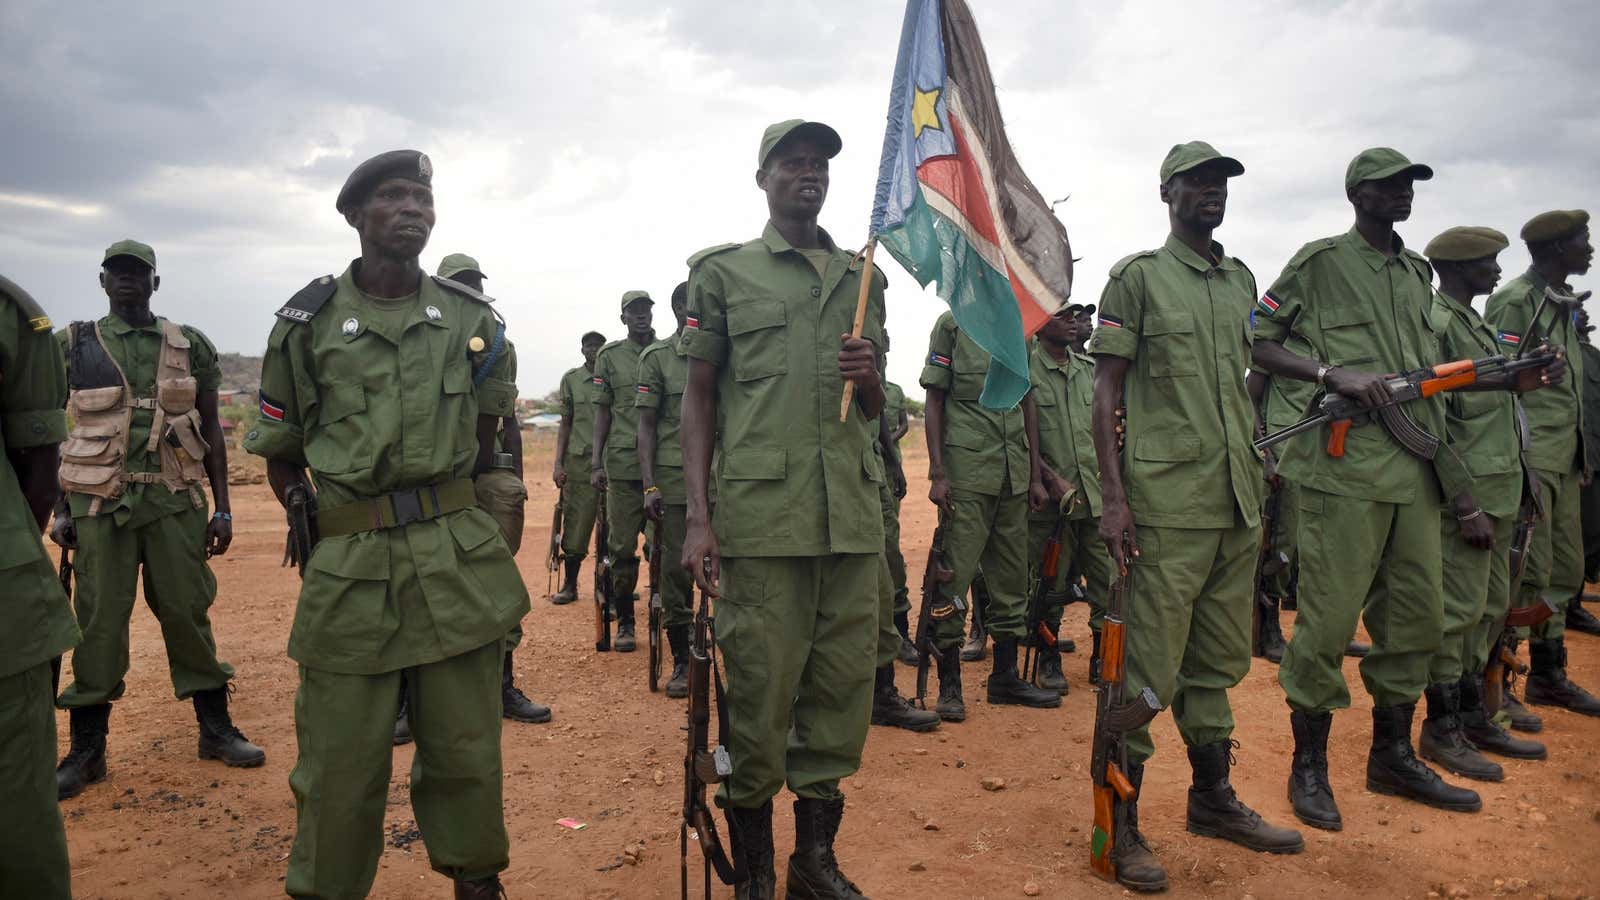 South Sudanese rebel soldiers at a military camp in the capital Juba, South Sudan, April 7, 2016.